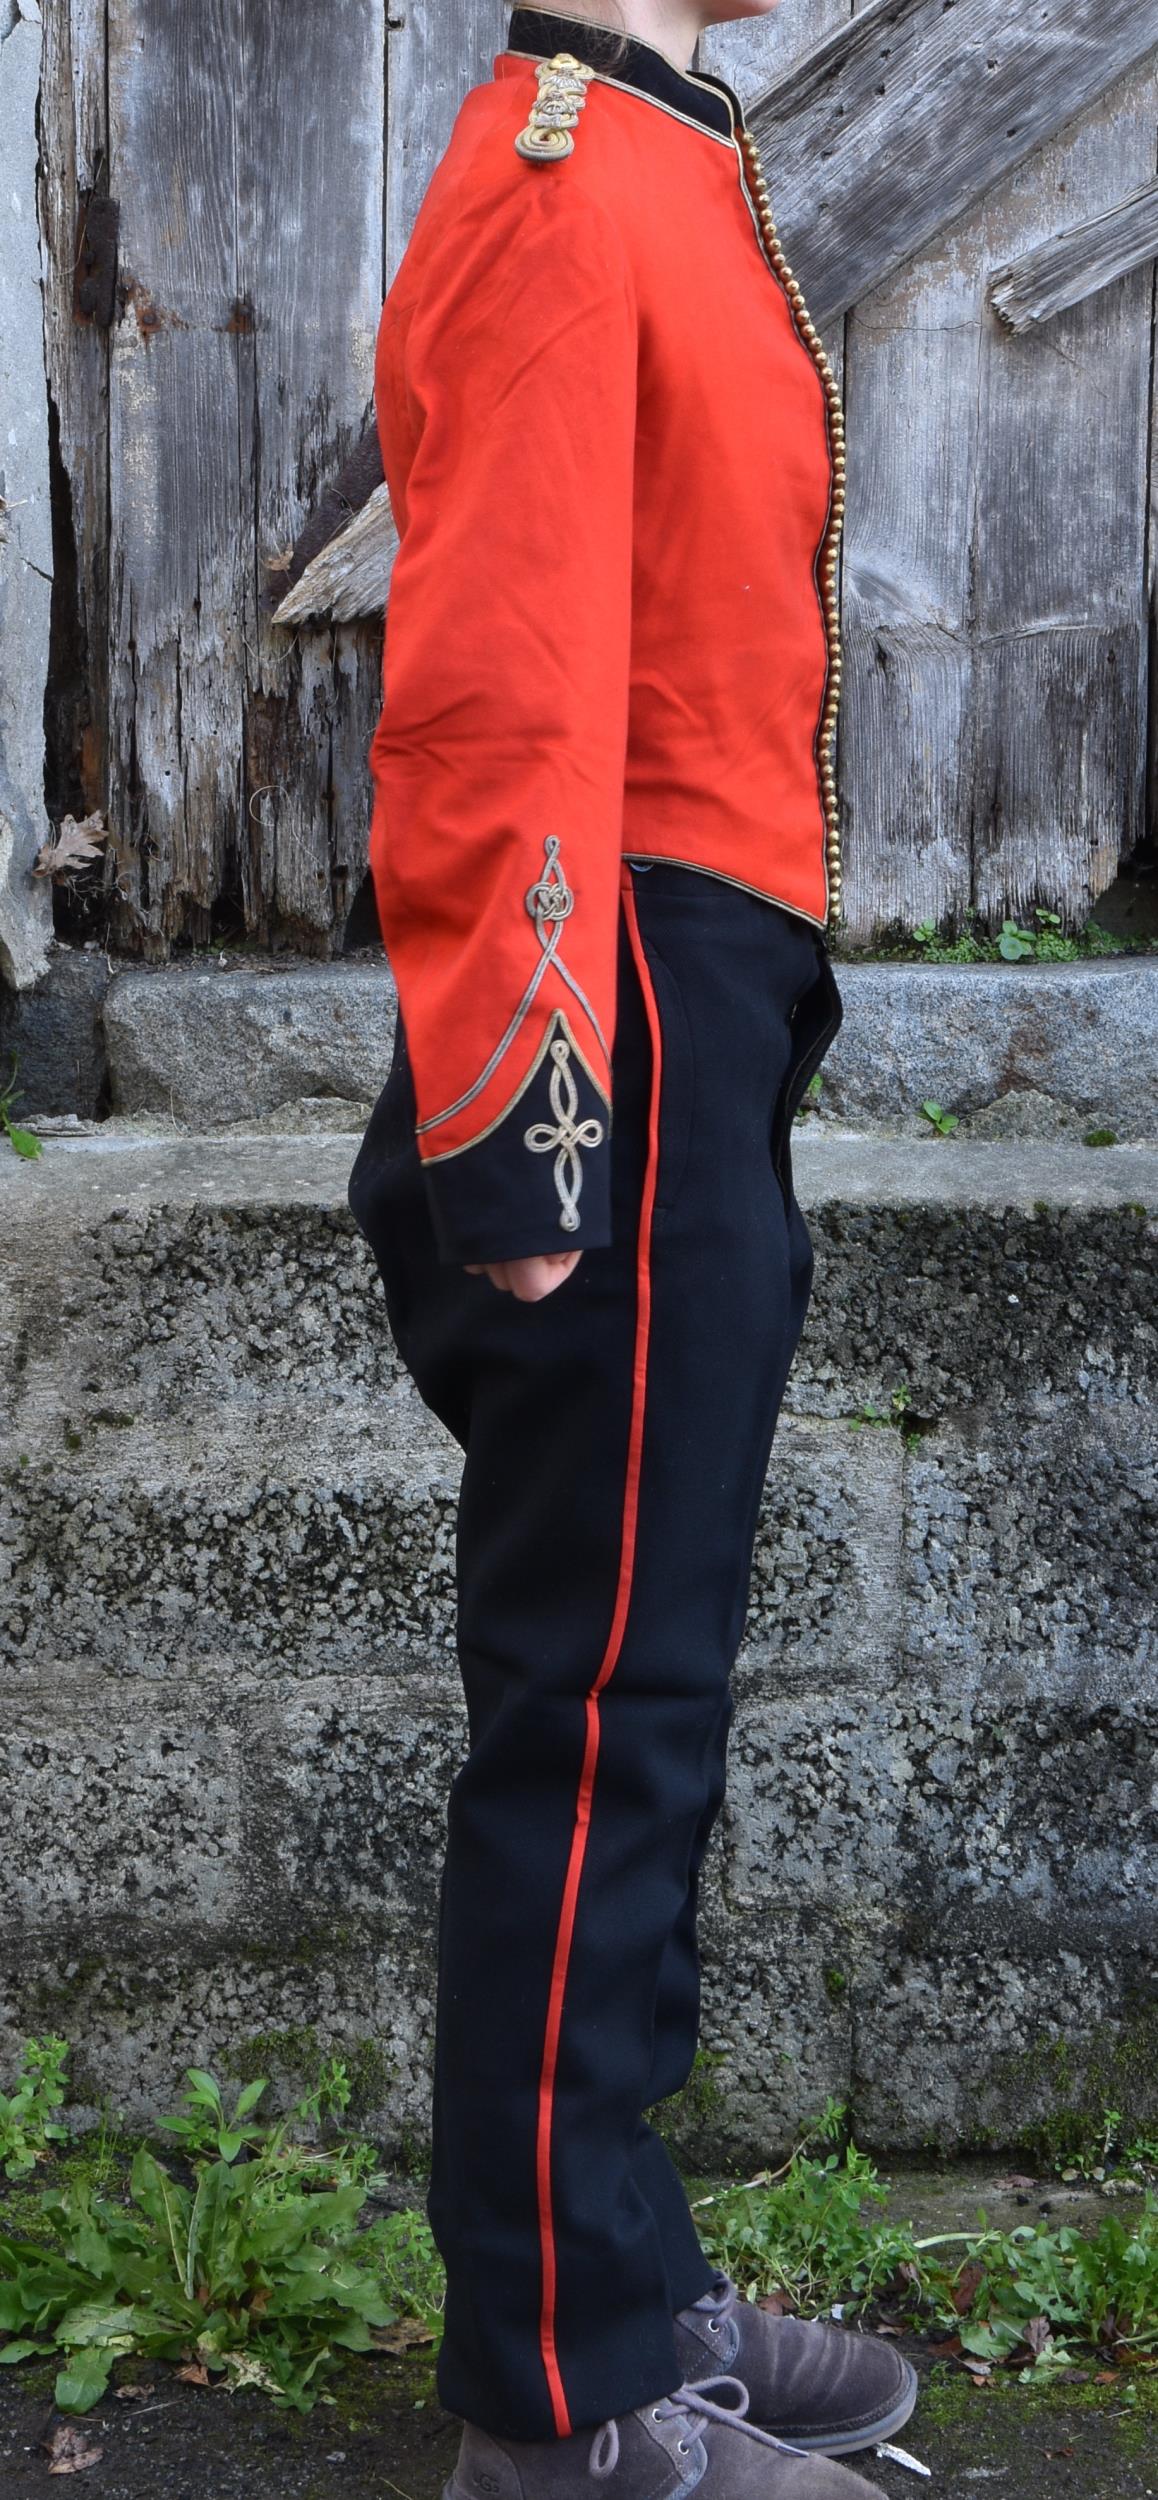 Royal Jersey Infantry interest - Lord Alexander Coutanche's uniforms contained in metal trunk, the - Image 14 of 19